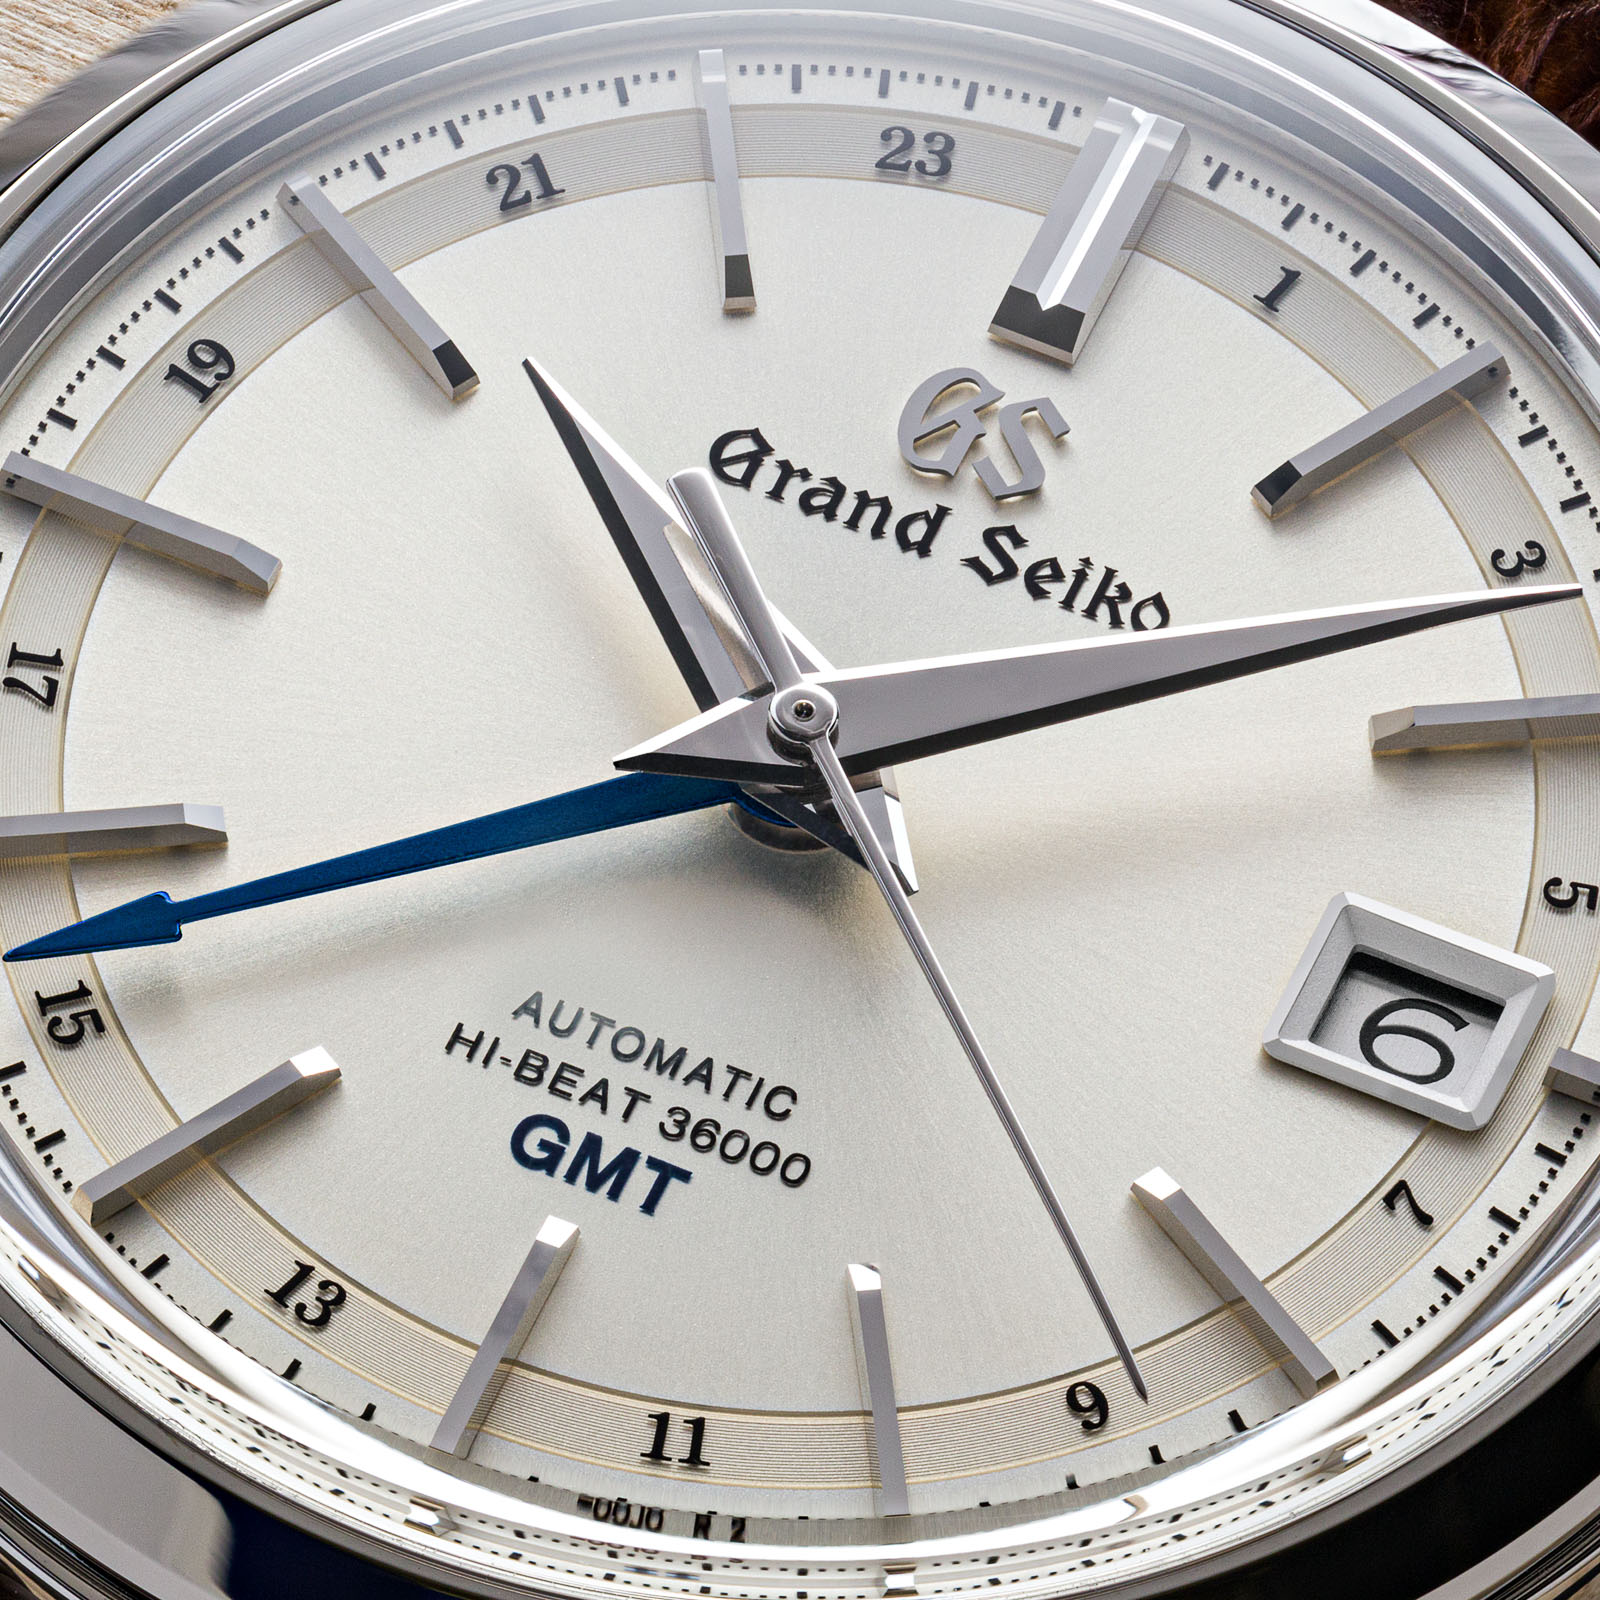 A light dial watch in a classic case with a tempered-blue GMT hand. 